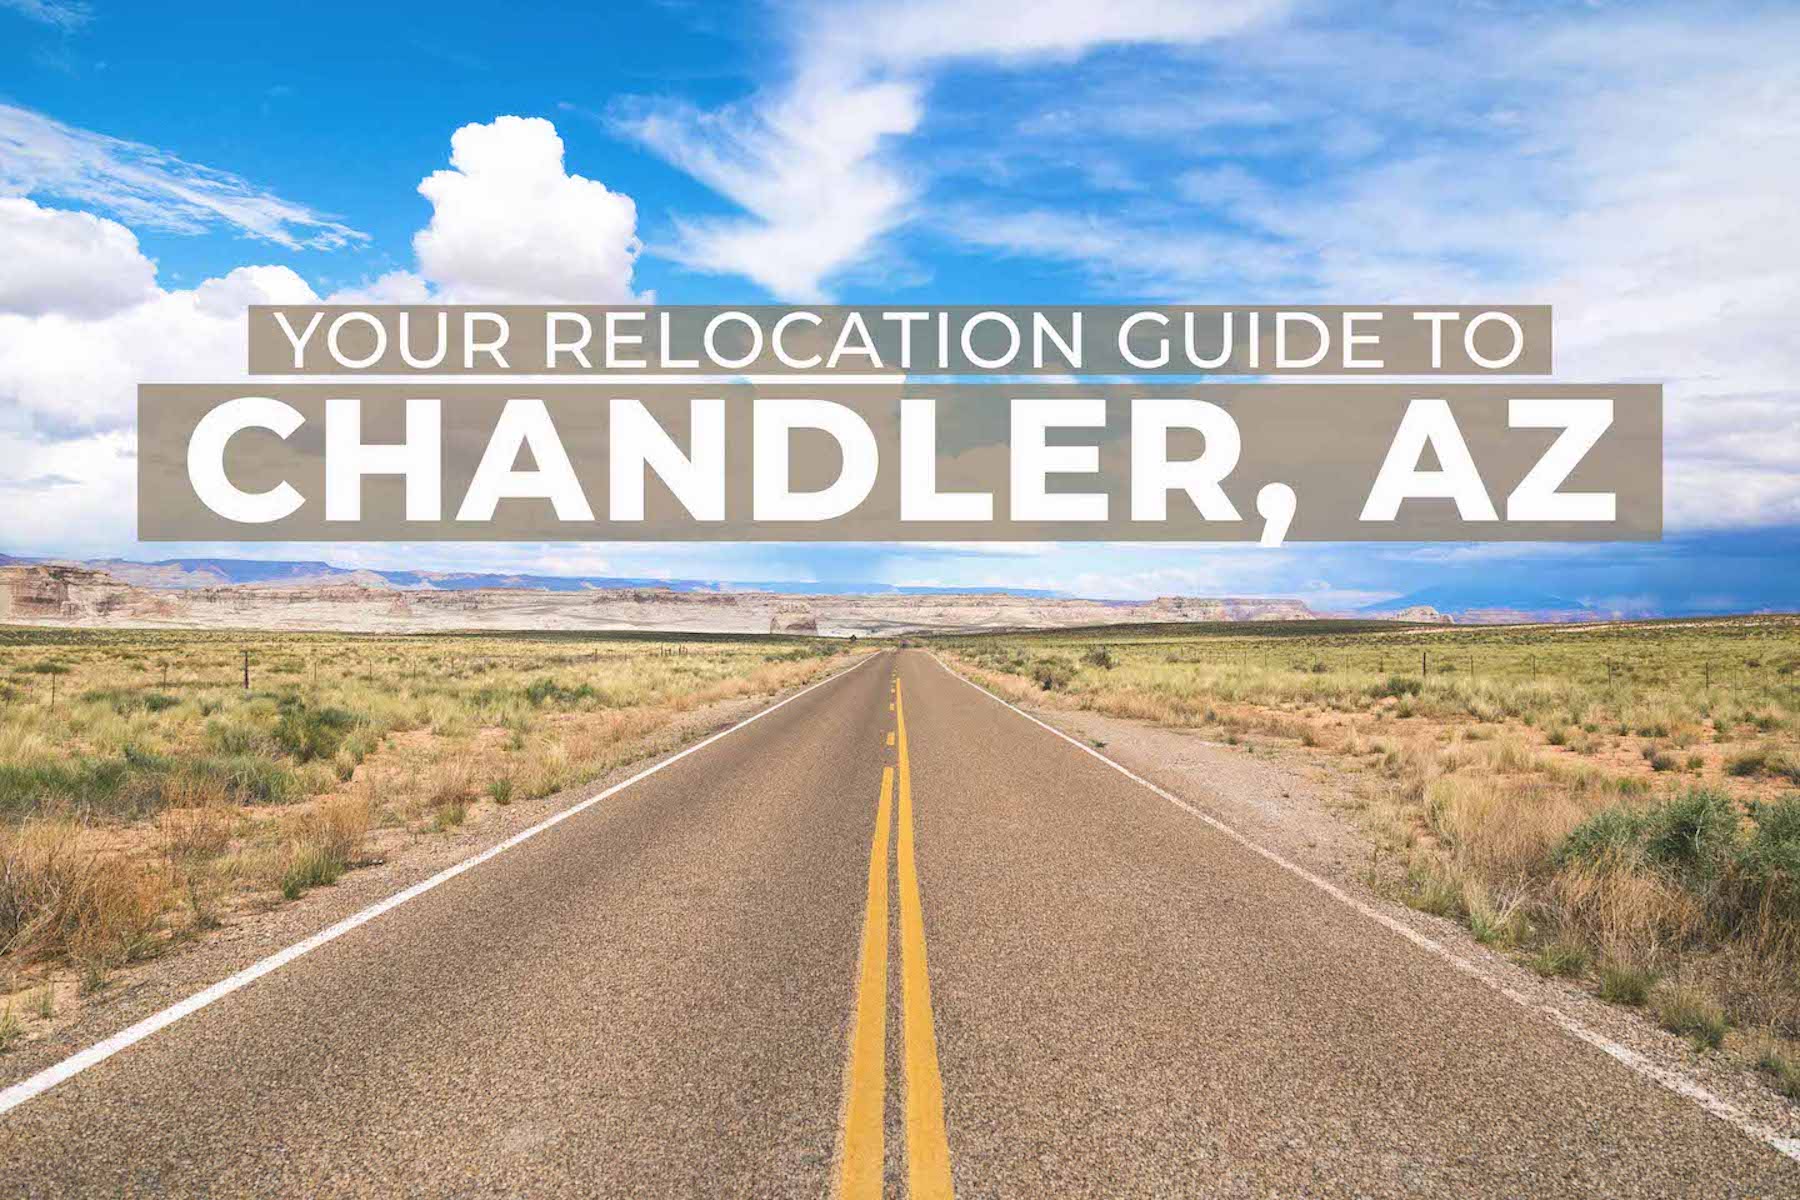 Relocation Guide to Chandler, AZ